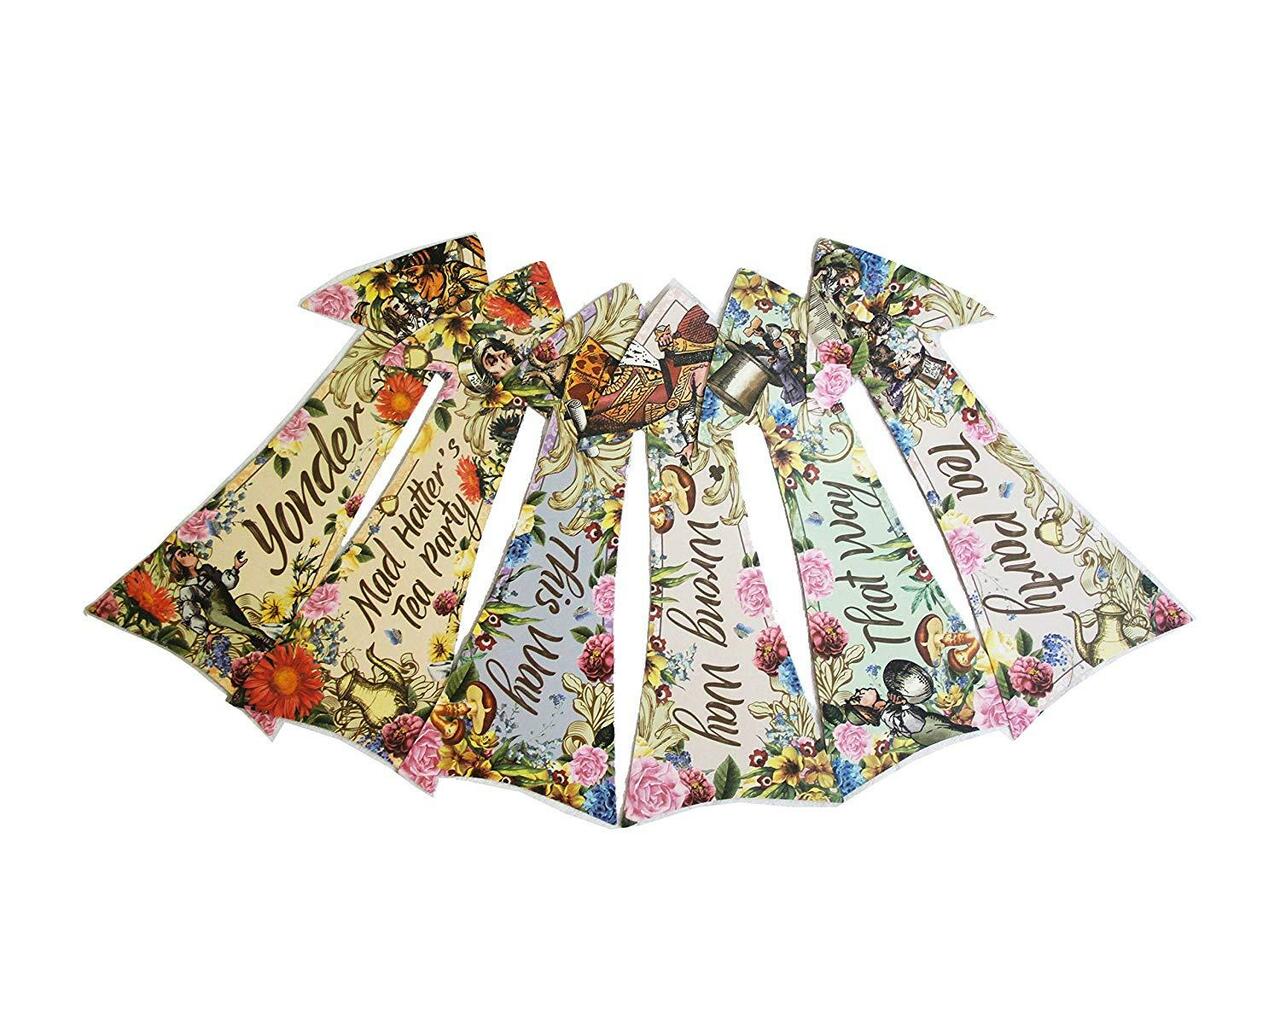 Alice in Wonderland Party Vintage Style Arrow Signs/Mad Hatters Tea Party Props Pack of 12 Signs